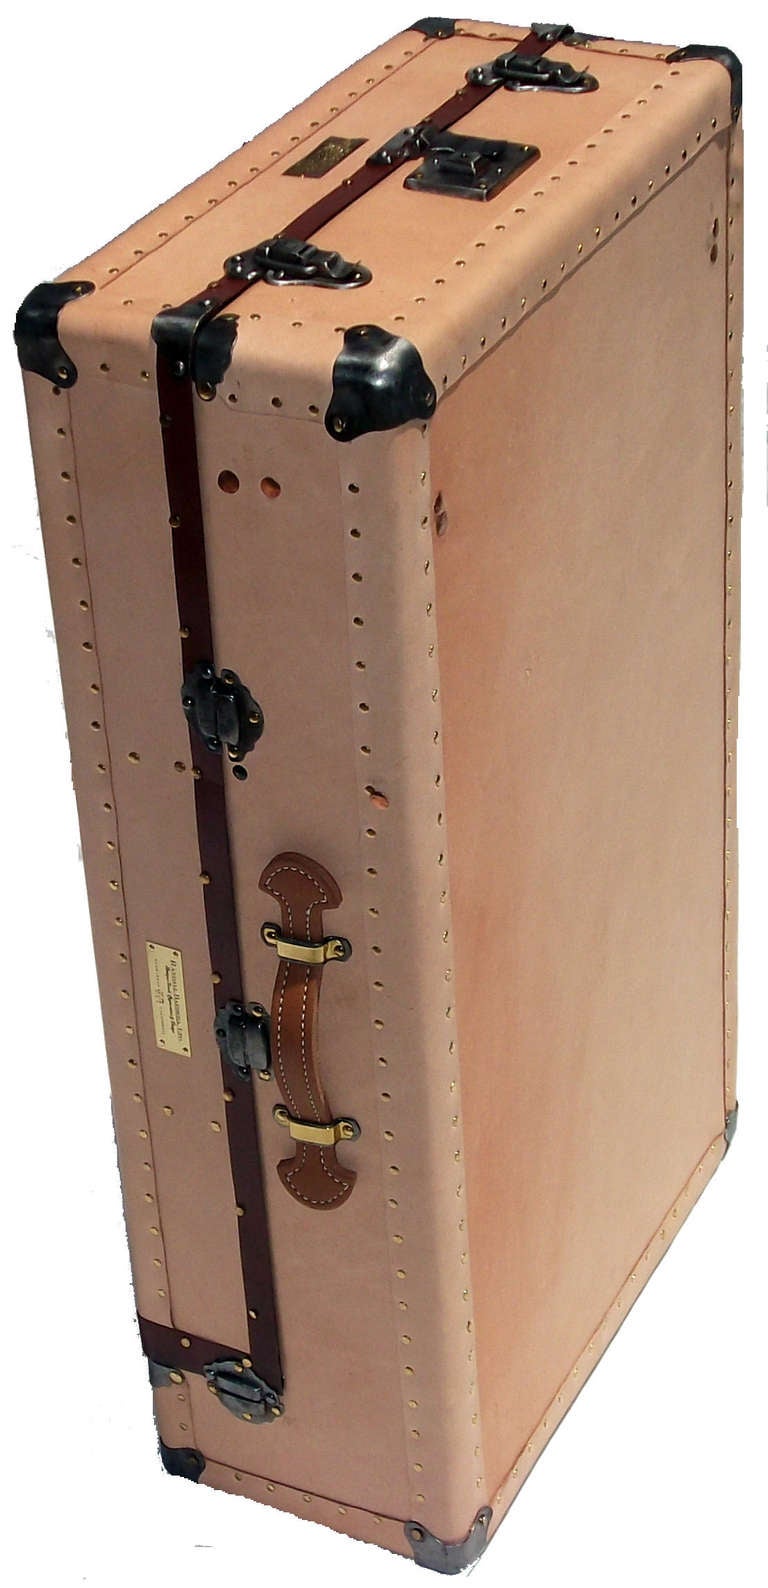 These scaled-down versions of wardrobe trunks from the 1940’s offered ample space to pack for shorter trips.  Recovered in vegetable tanned leather and lined in black cotton velvet. Inner 2 chamber storage compartment with hinged lid, secured by